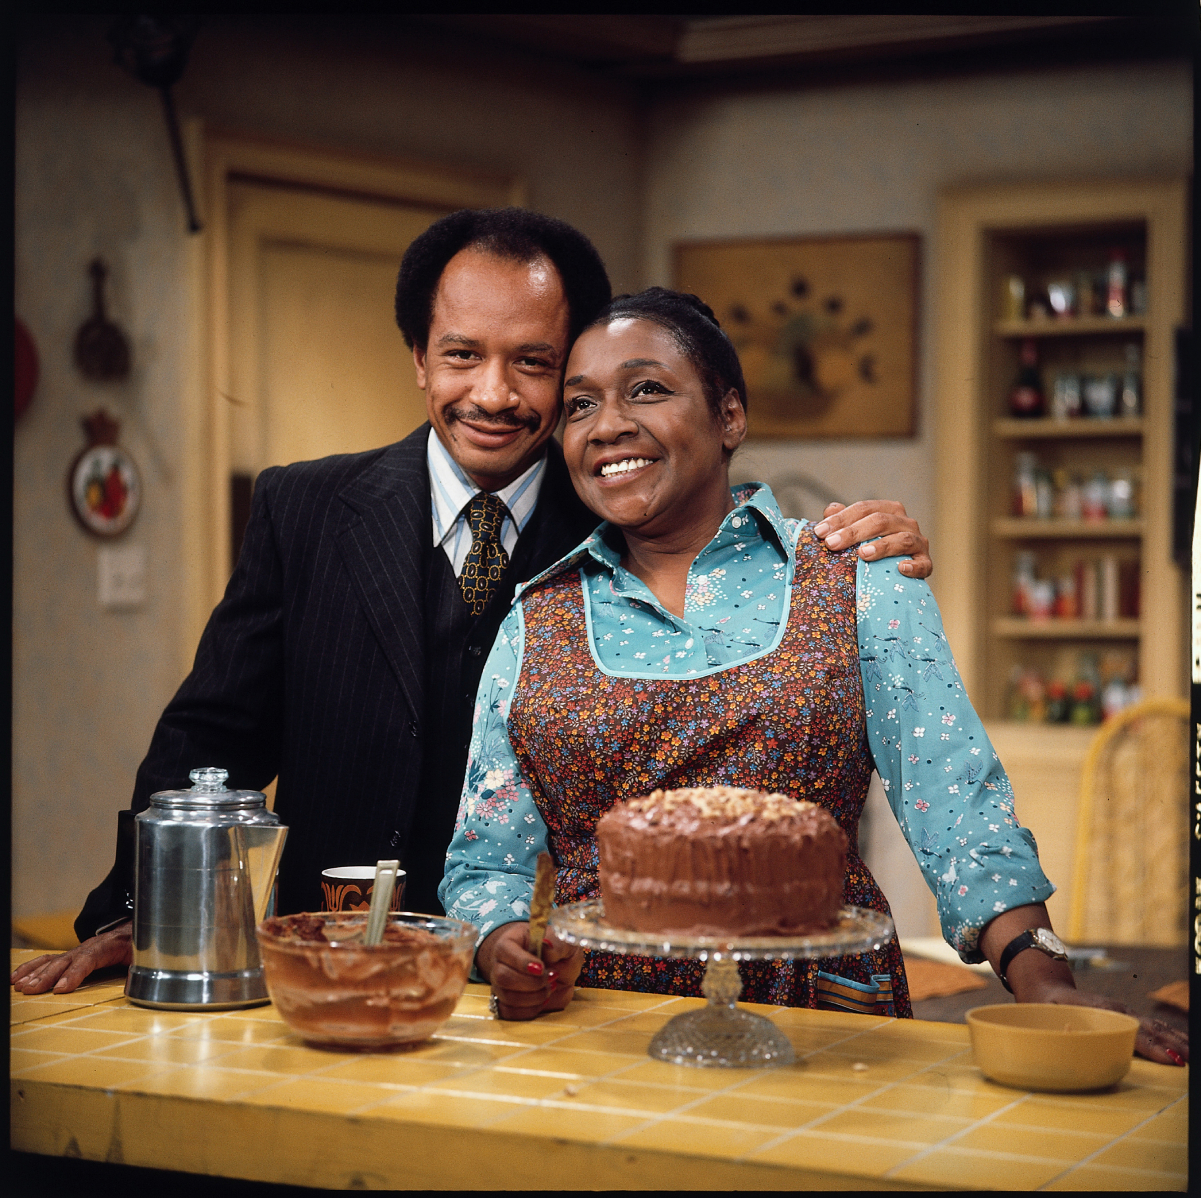 (L to R) Sherman Hemsley as George Jefferson and Isabel Sanford as his wife Louise Jefferson on 'The Jeffersons'